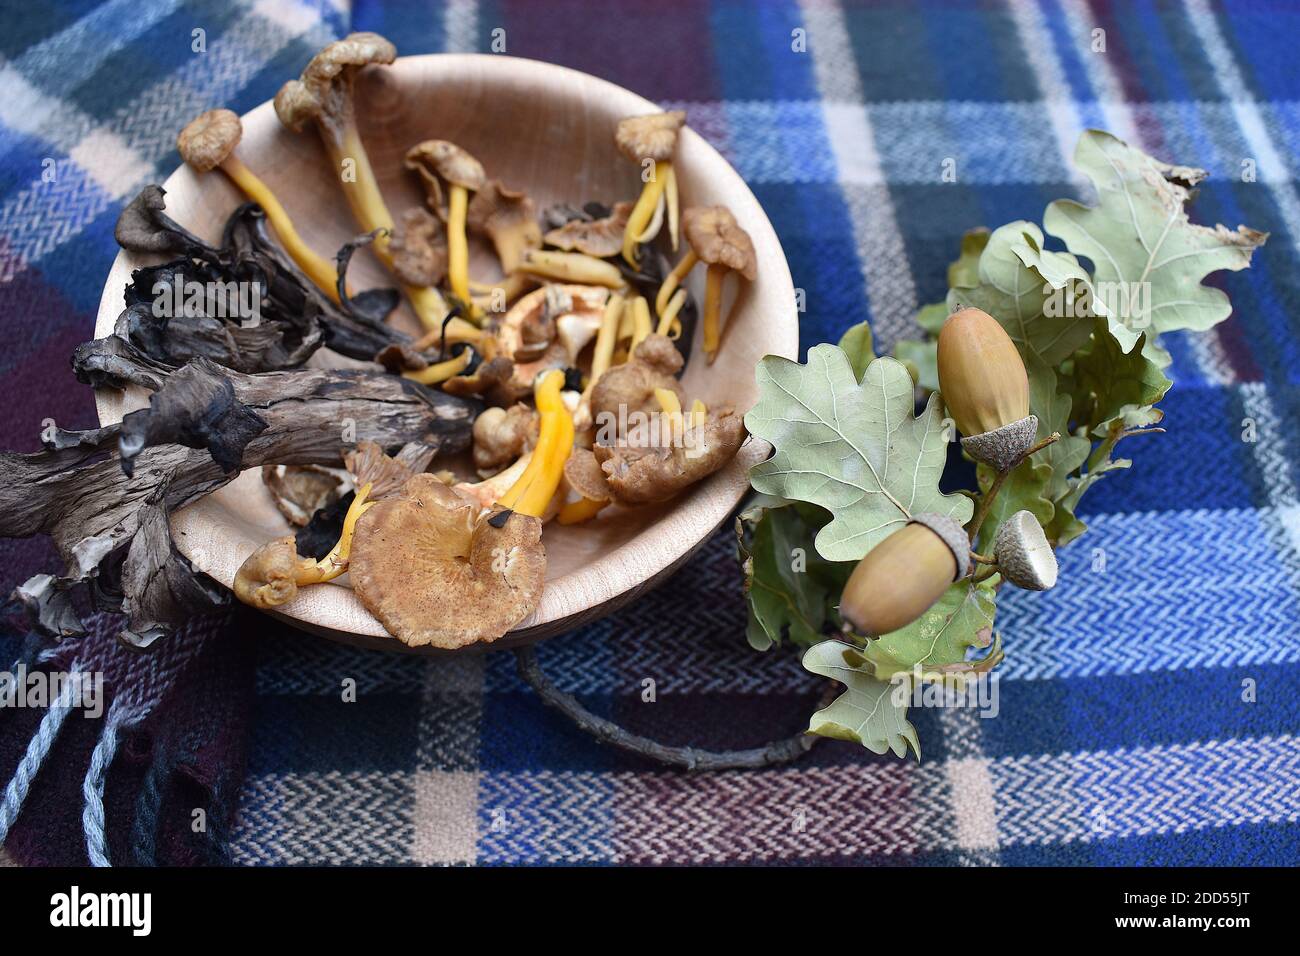 Freshly picked in Central Europe and Scotland wild mushrooms Top finds of the day include Chanterelles Pied de Mouton Trompette de la Mort or Girolles Stock Photo